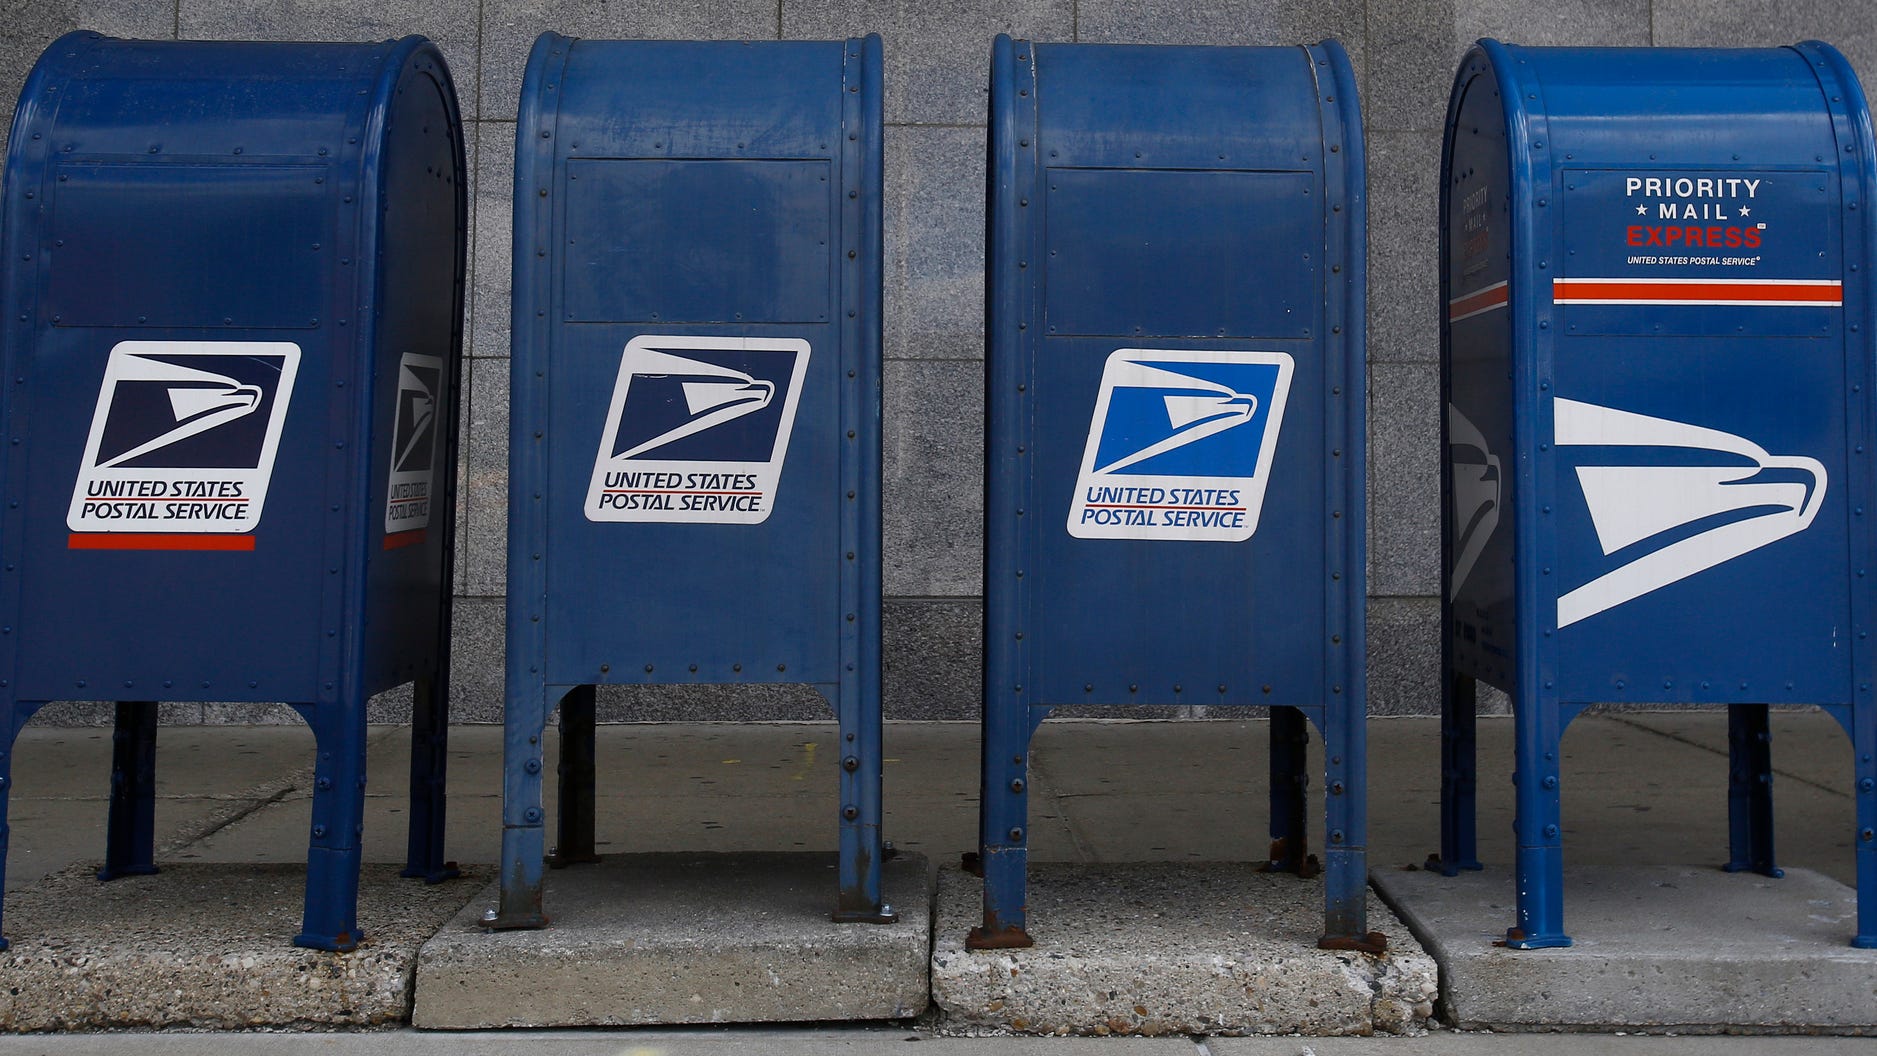 Why the mail is taking so long and your packages might be late